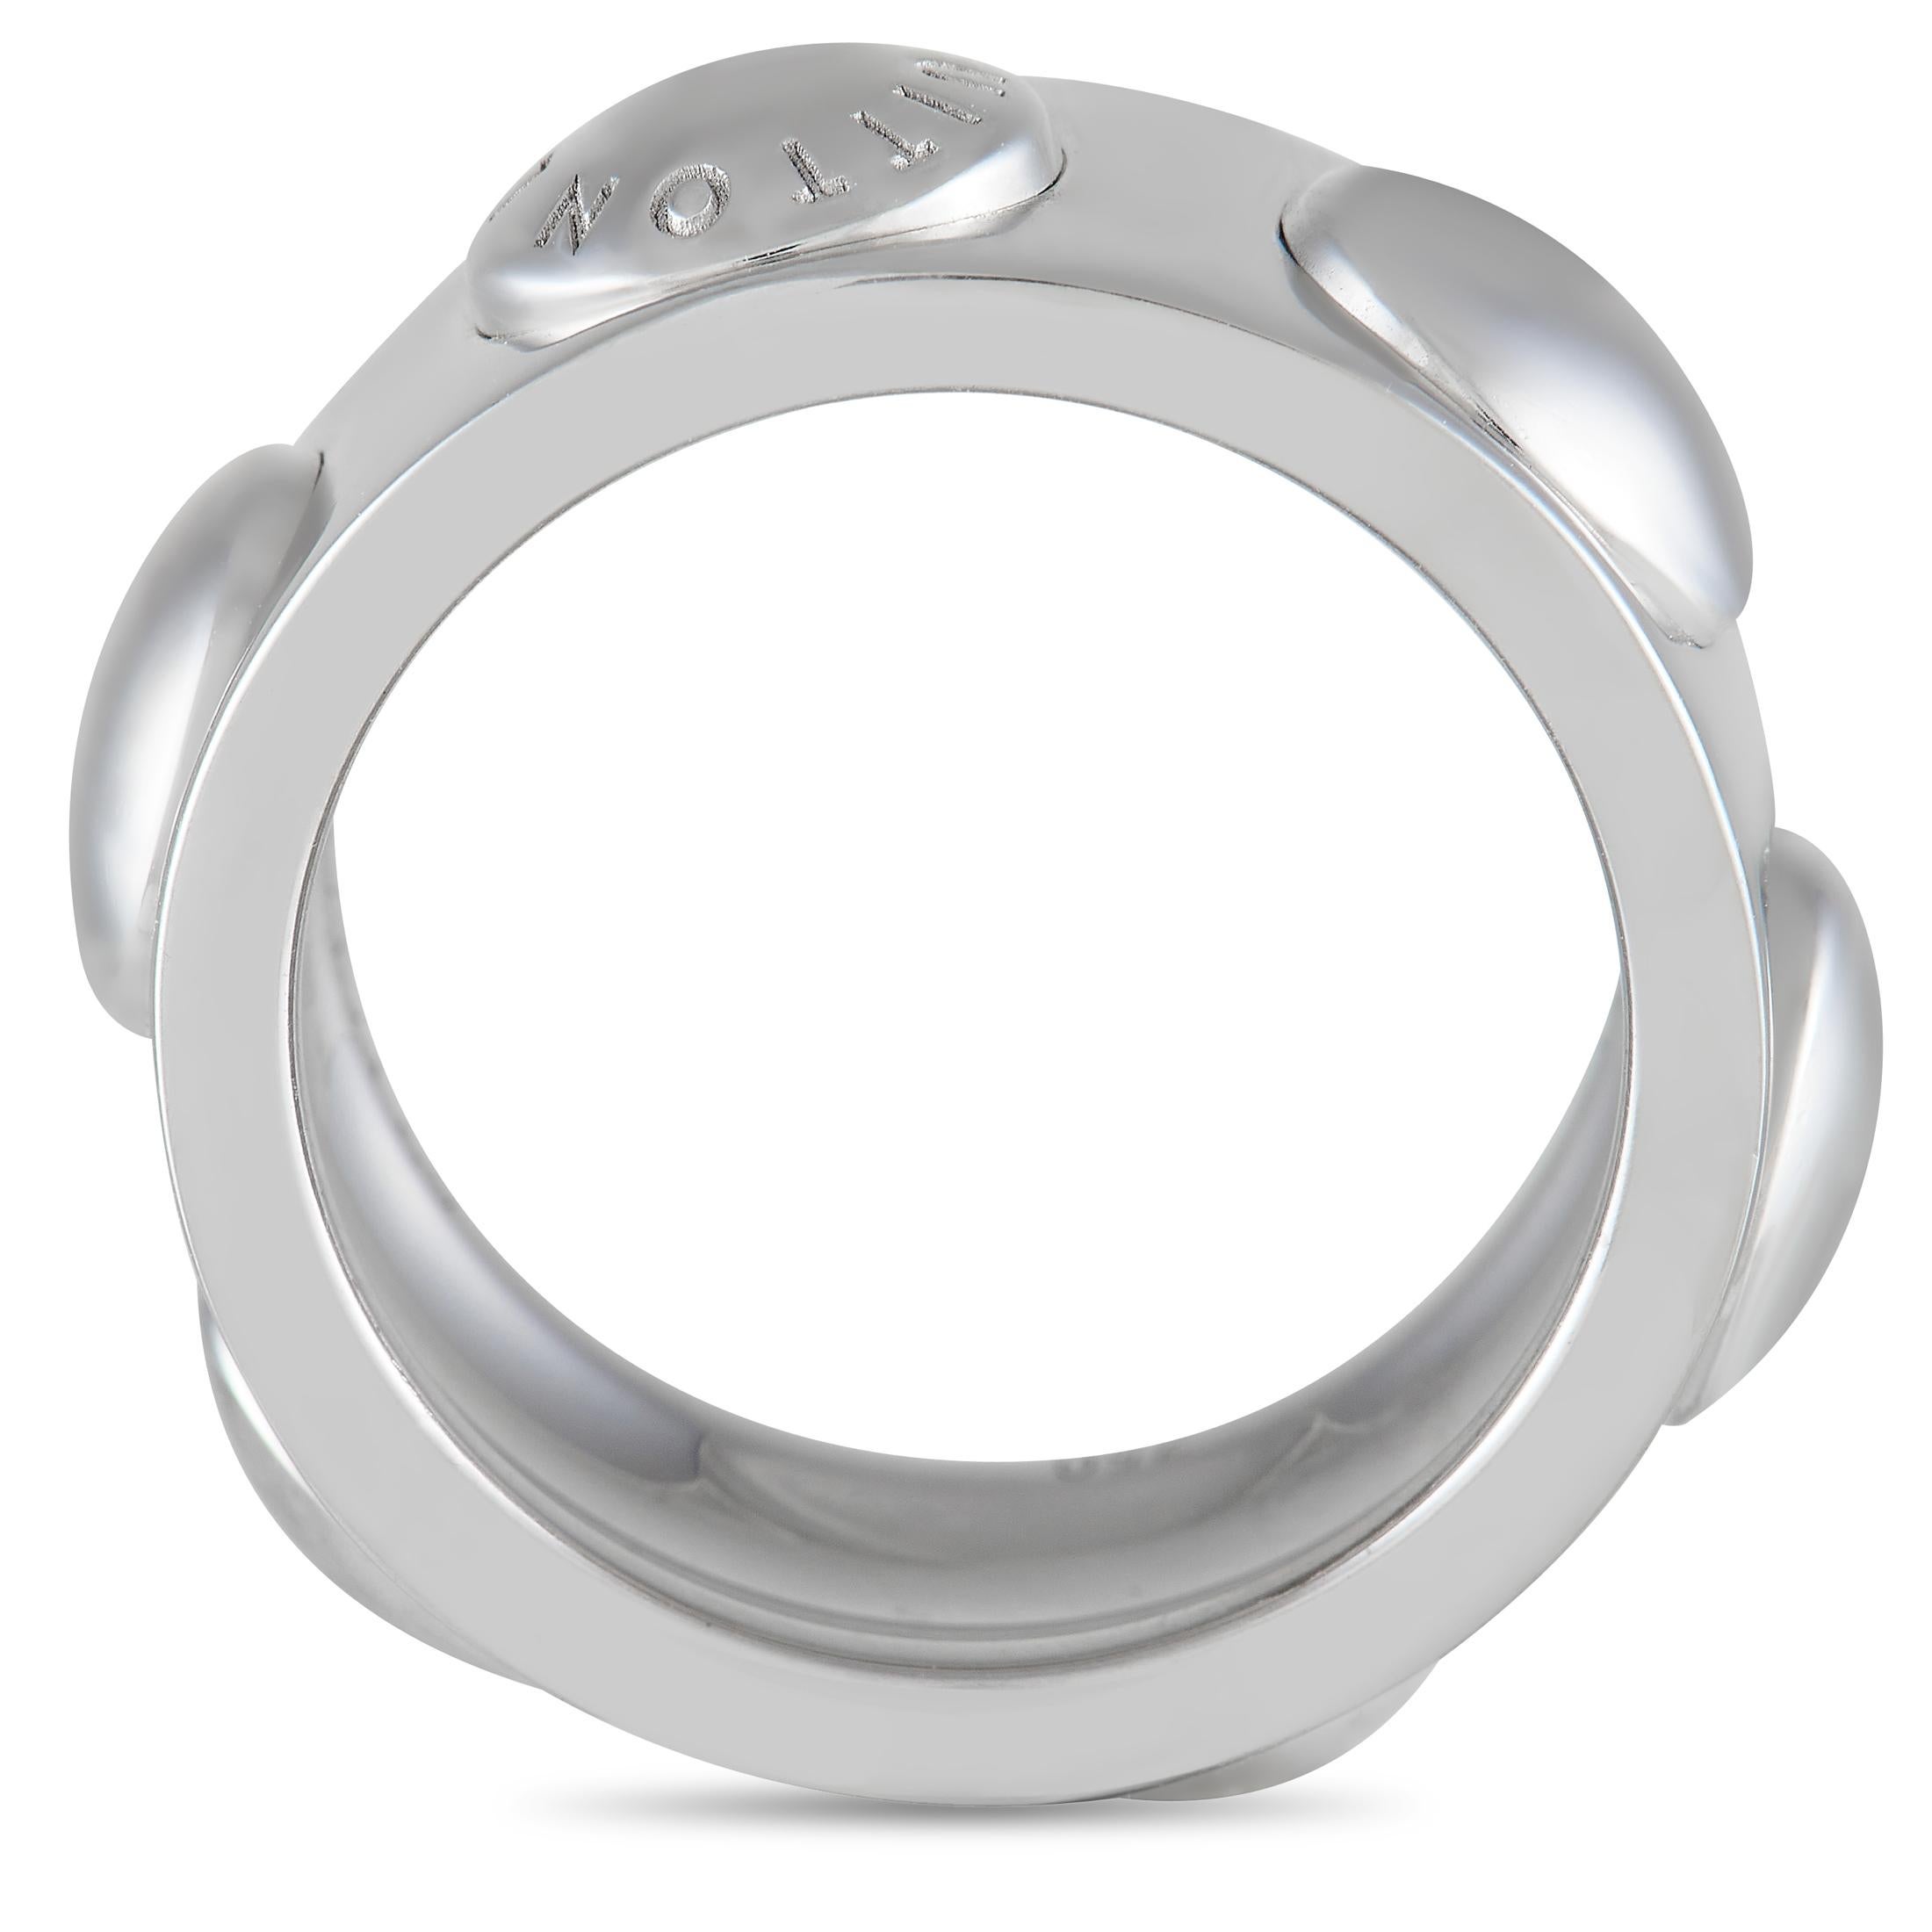 This Louis Vuitton ring is an easy way to add a touch of luxury to any ensemble. Simple and sophisticated, this 18K White Gold ring comes to life thanks to sleek rounded accents and the brand’s engraved moniker. Incredibly bold, it measures 10mm